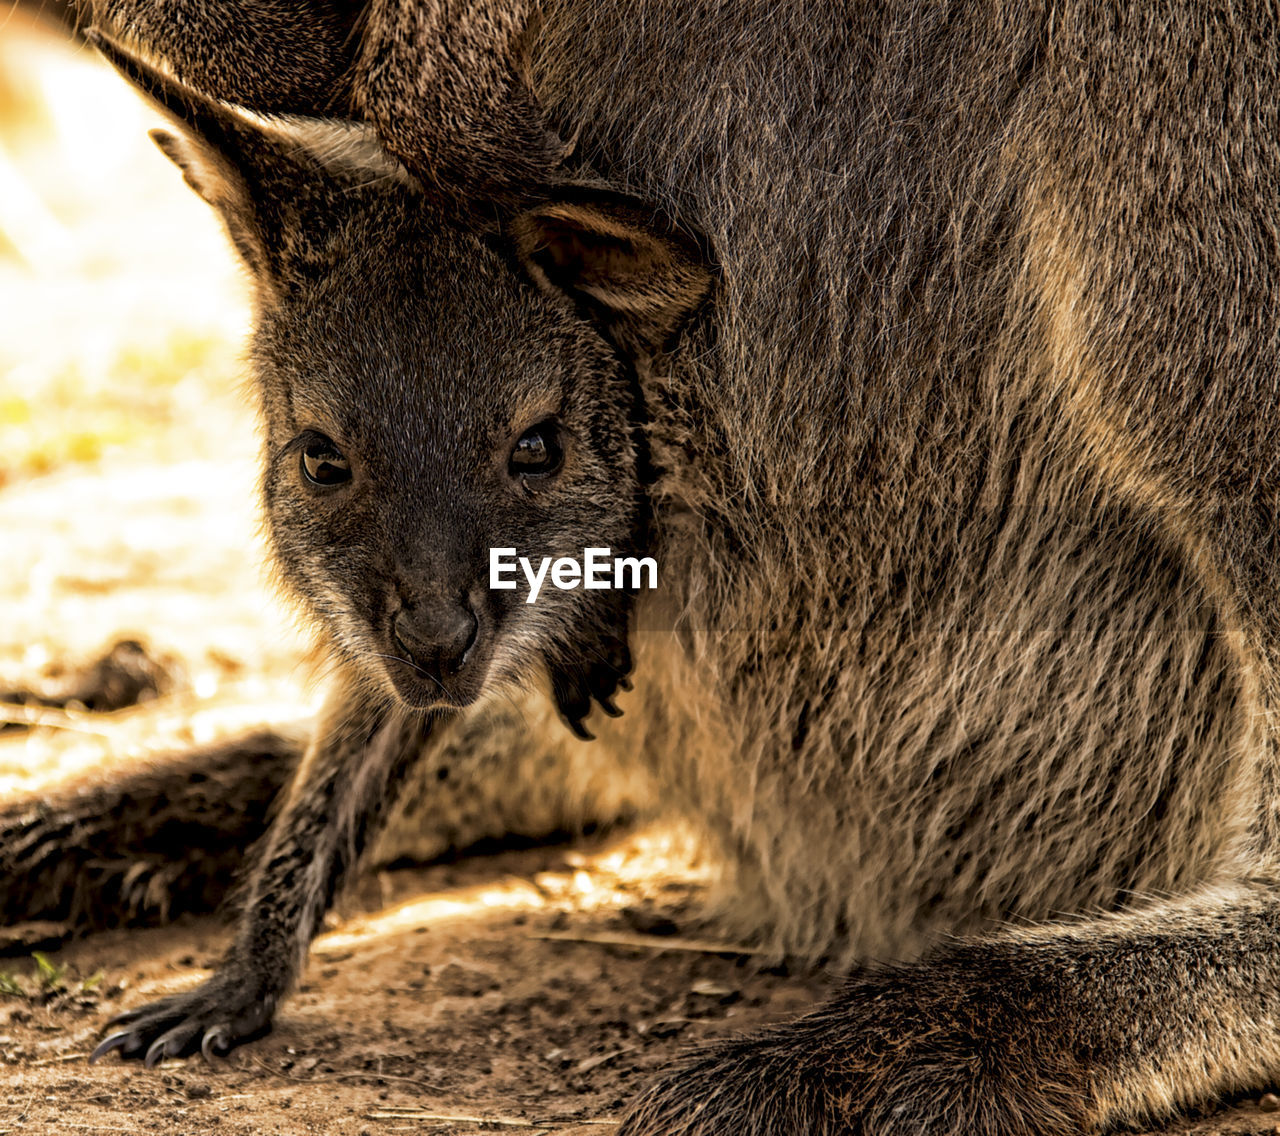 Close-up portrait of baby wallaby in mother's pouch